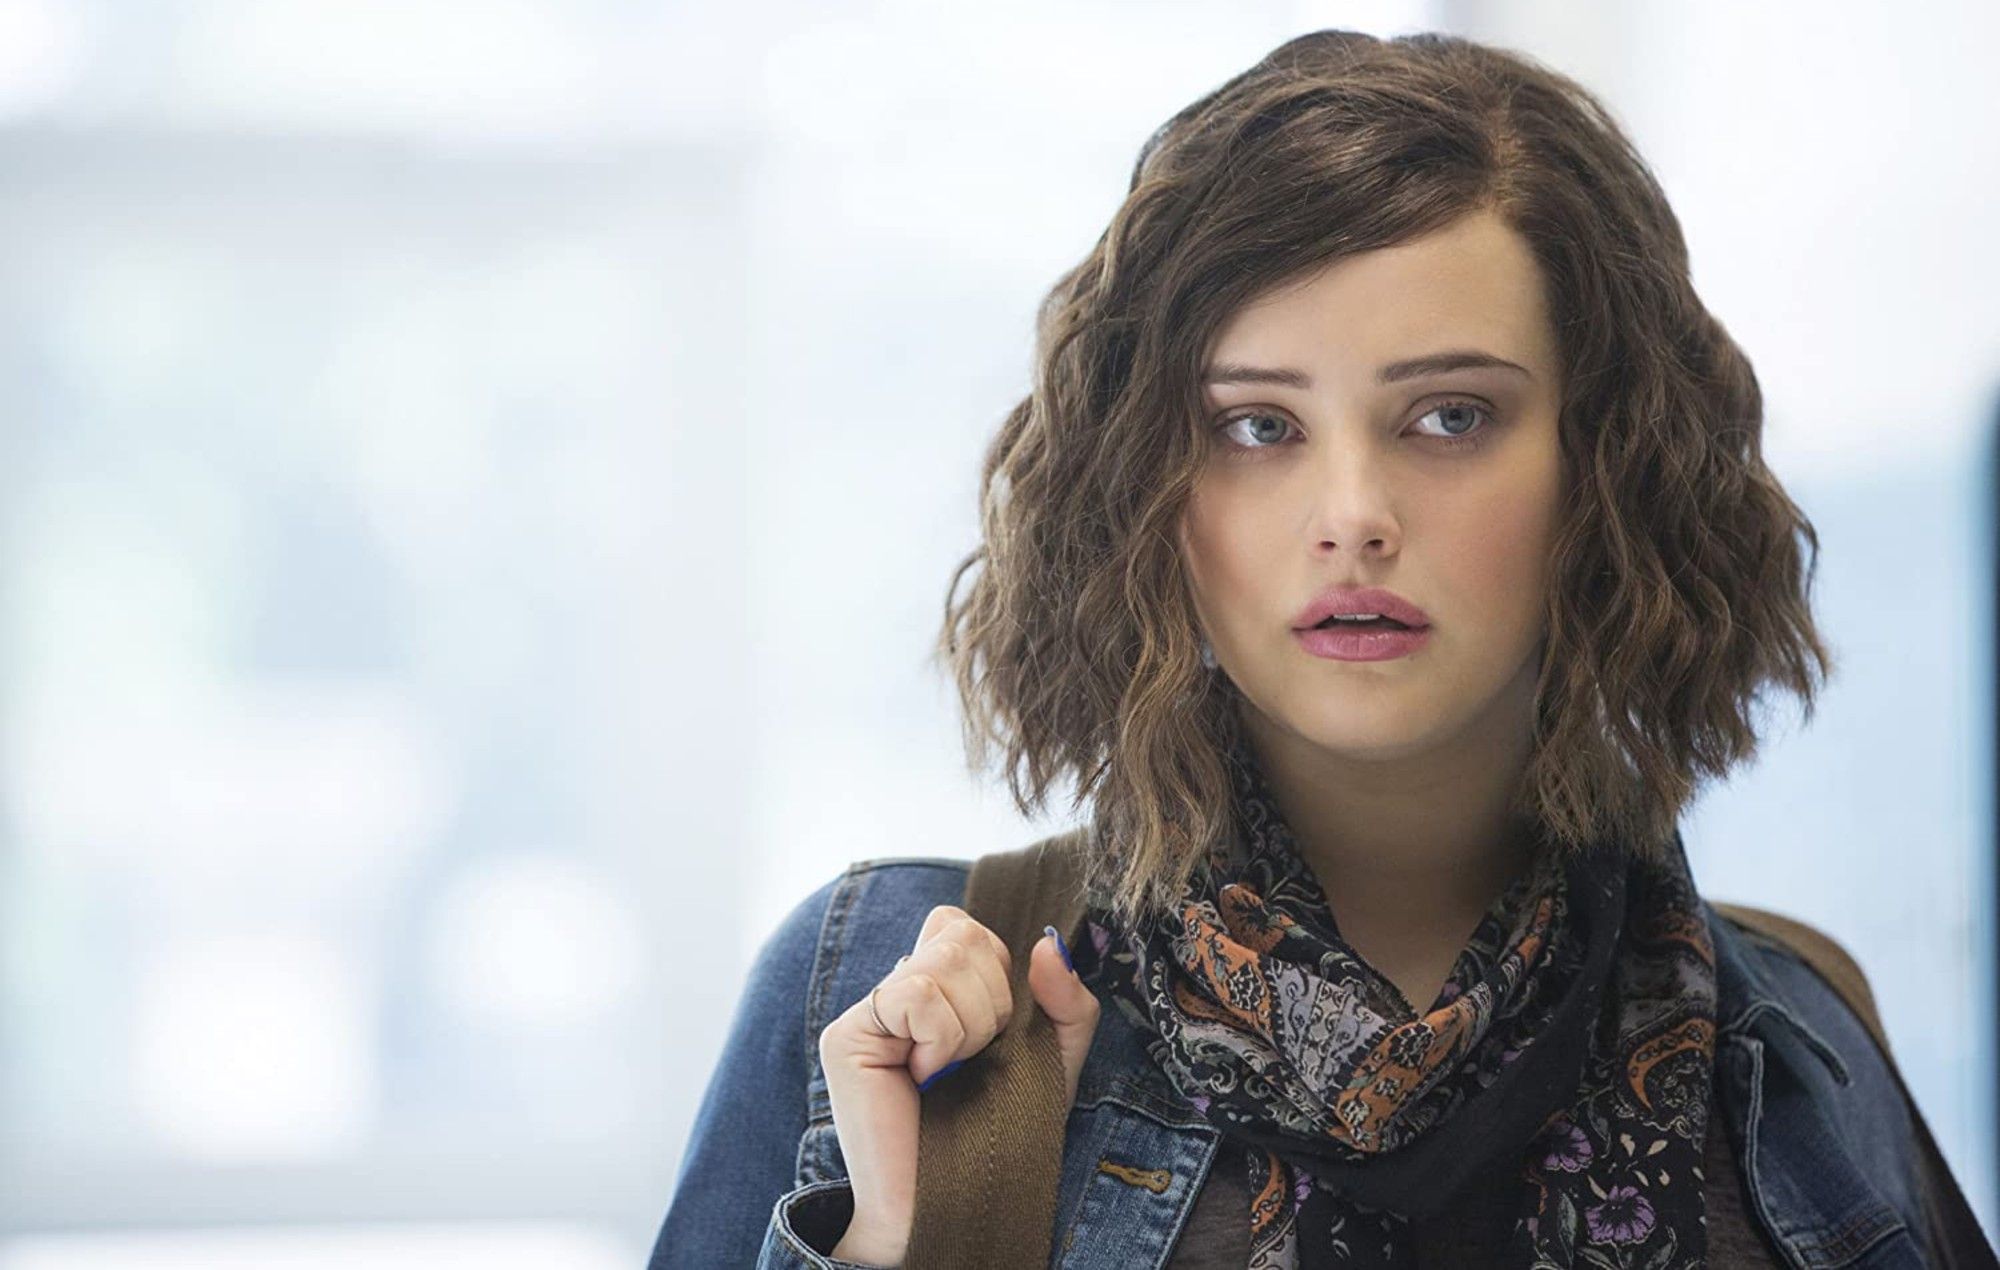 Katherine Langford explains why she didn't attend filming for